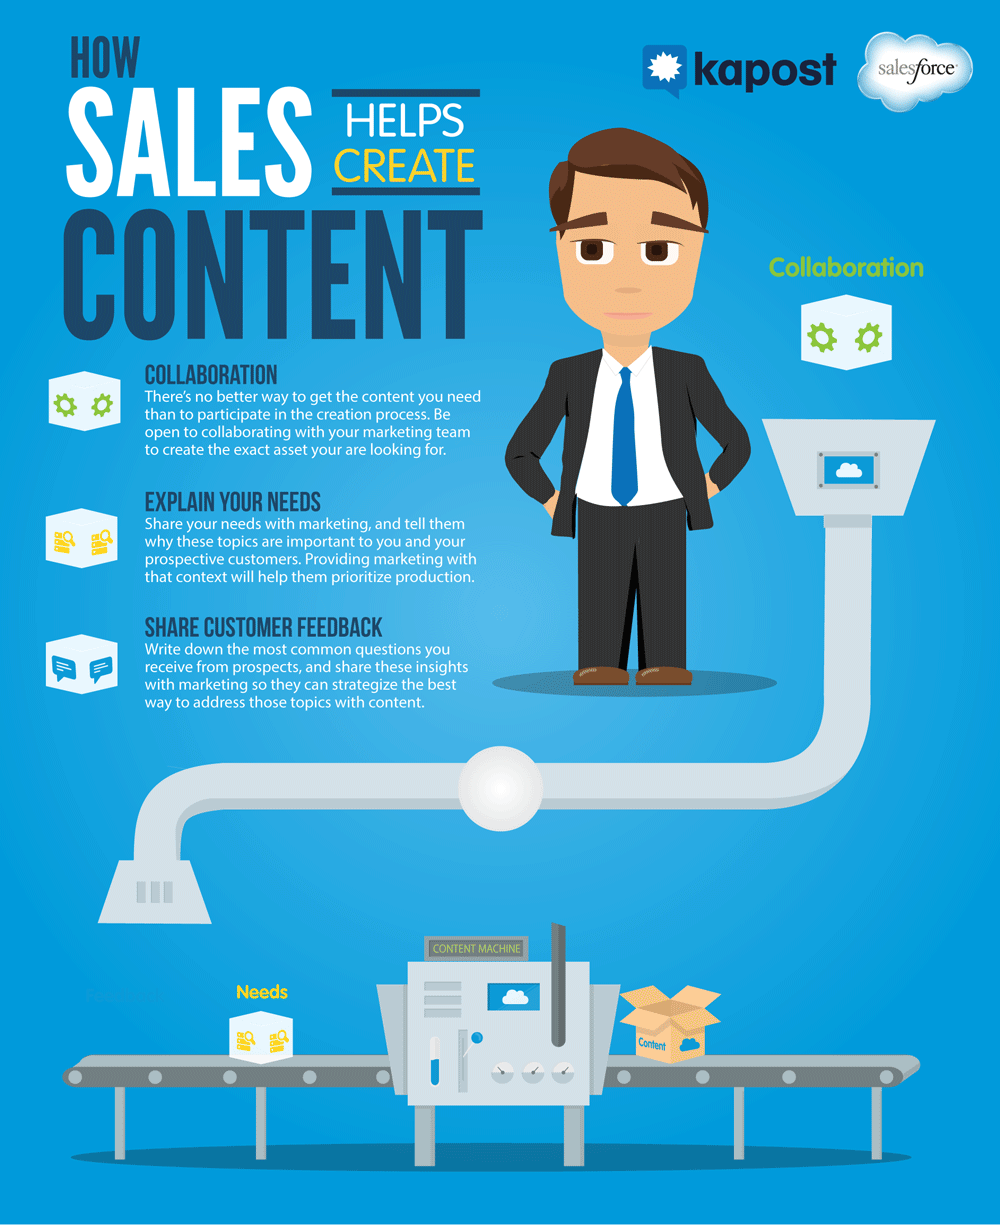 How Sales Helps Create Content Infographic